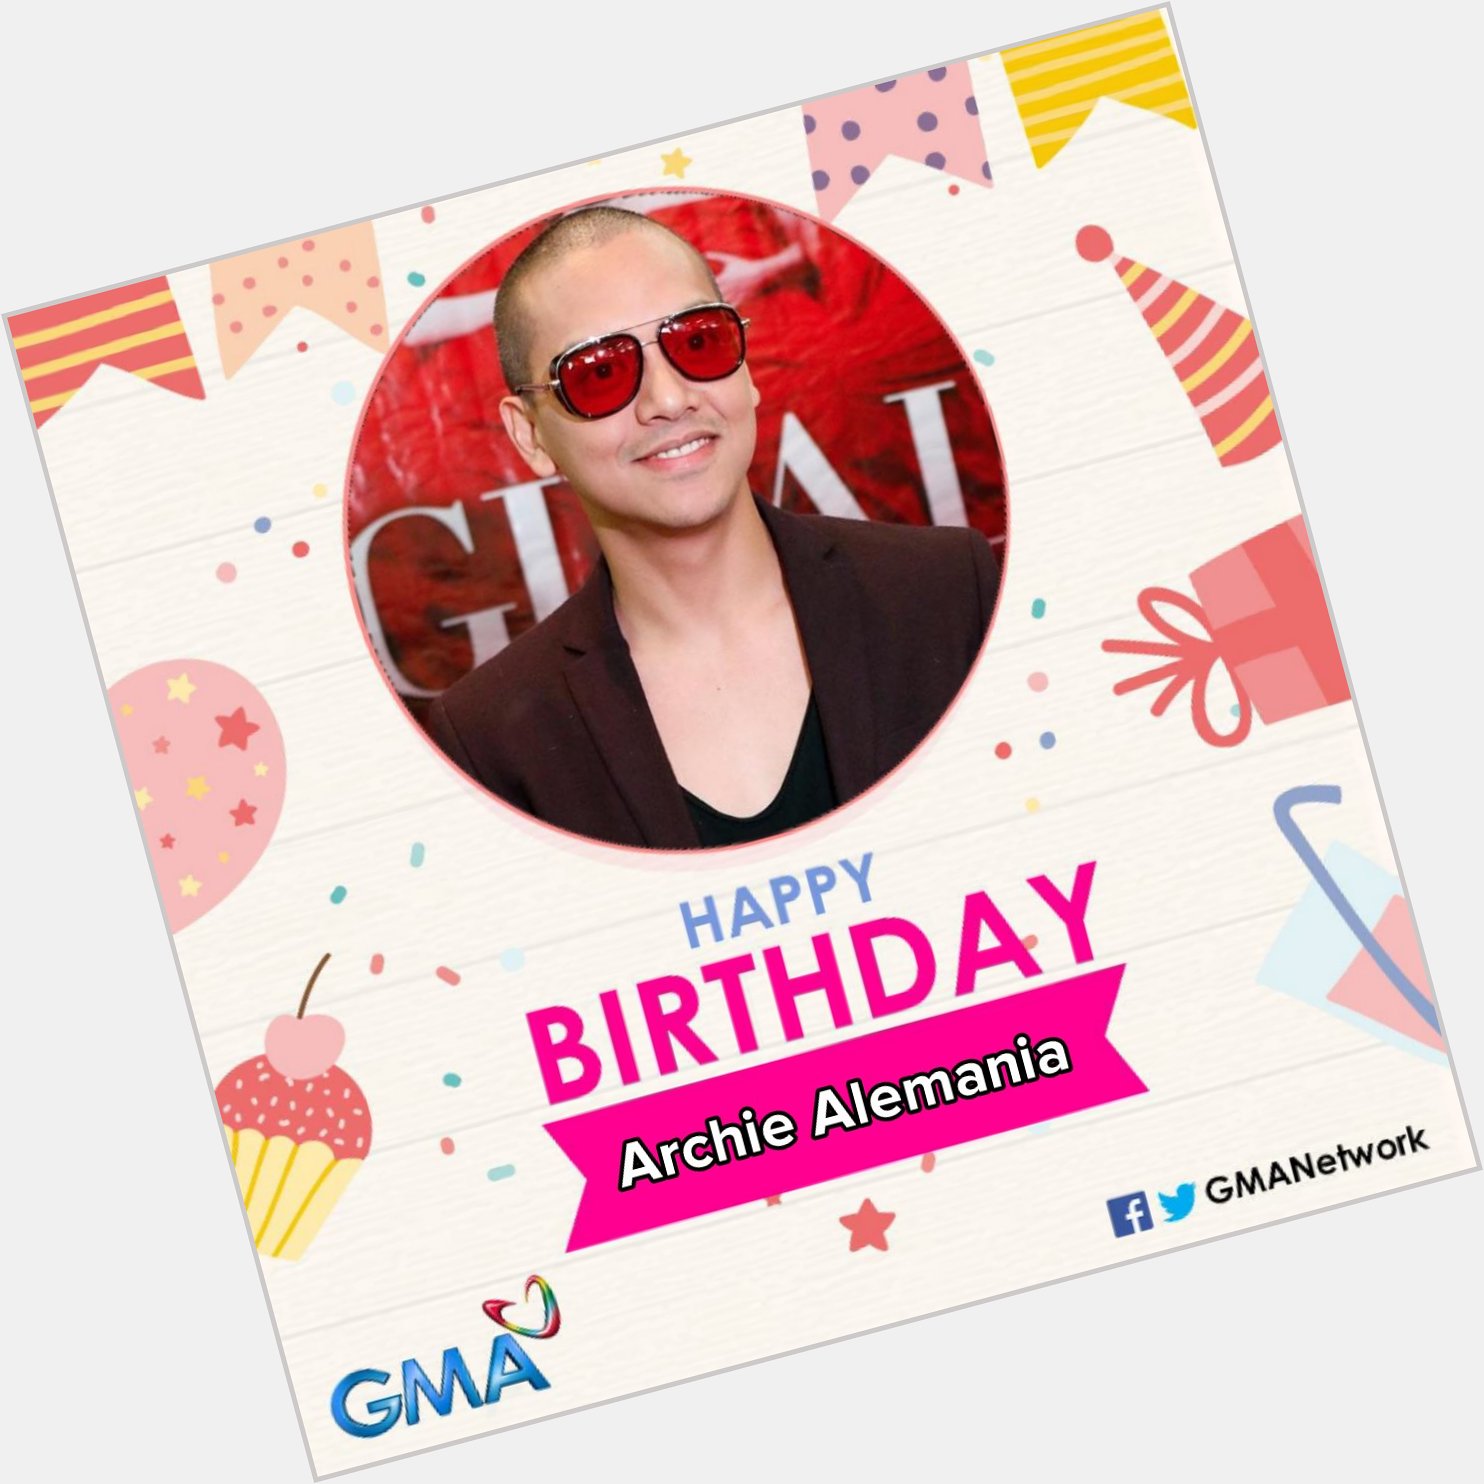 Mga Kapuso, join us in wishing ARCHIE ALEMANIA a HAPPY 40th BIRTHDAY!!!  